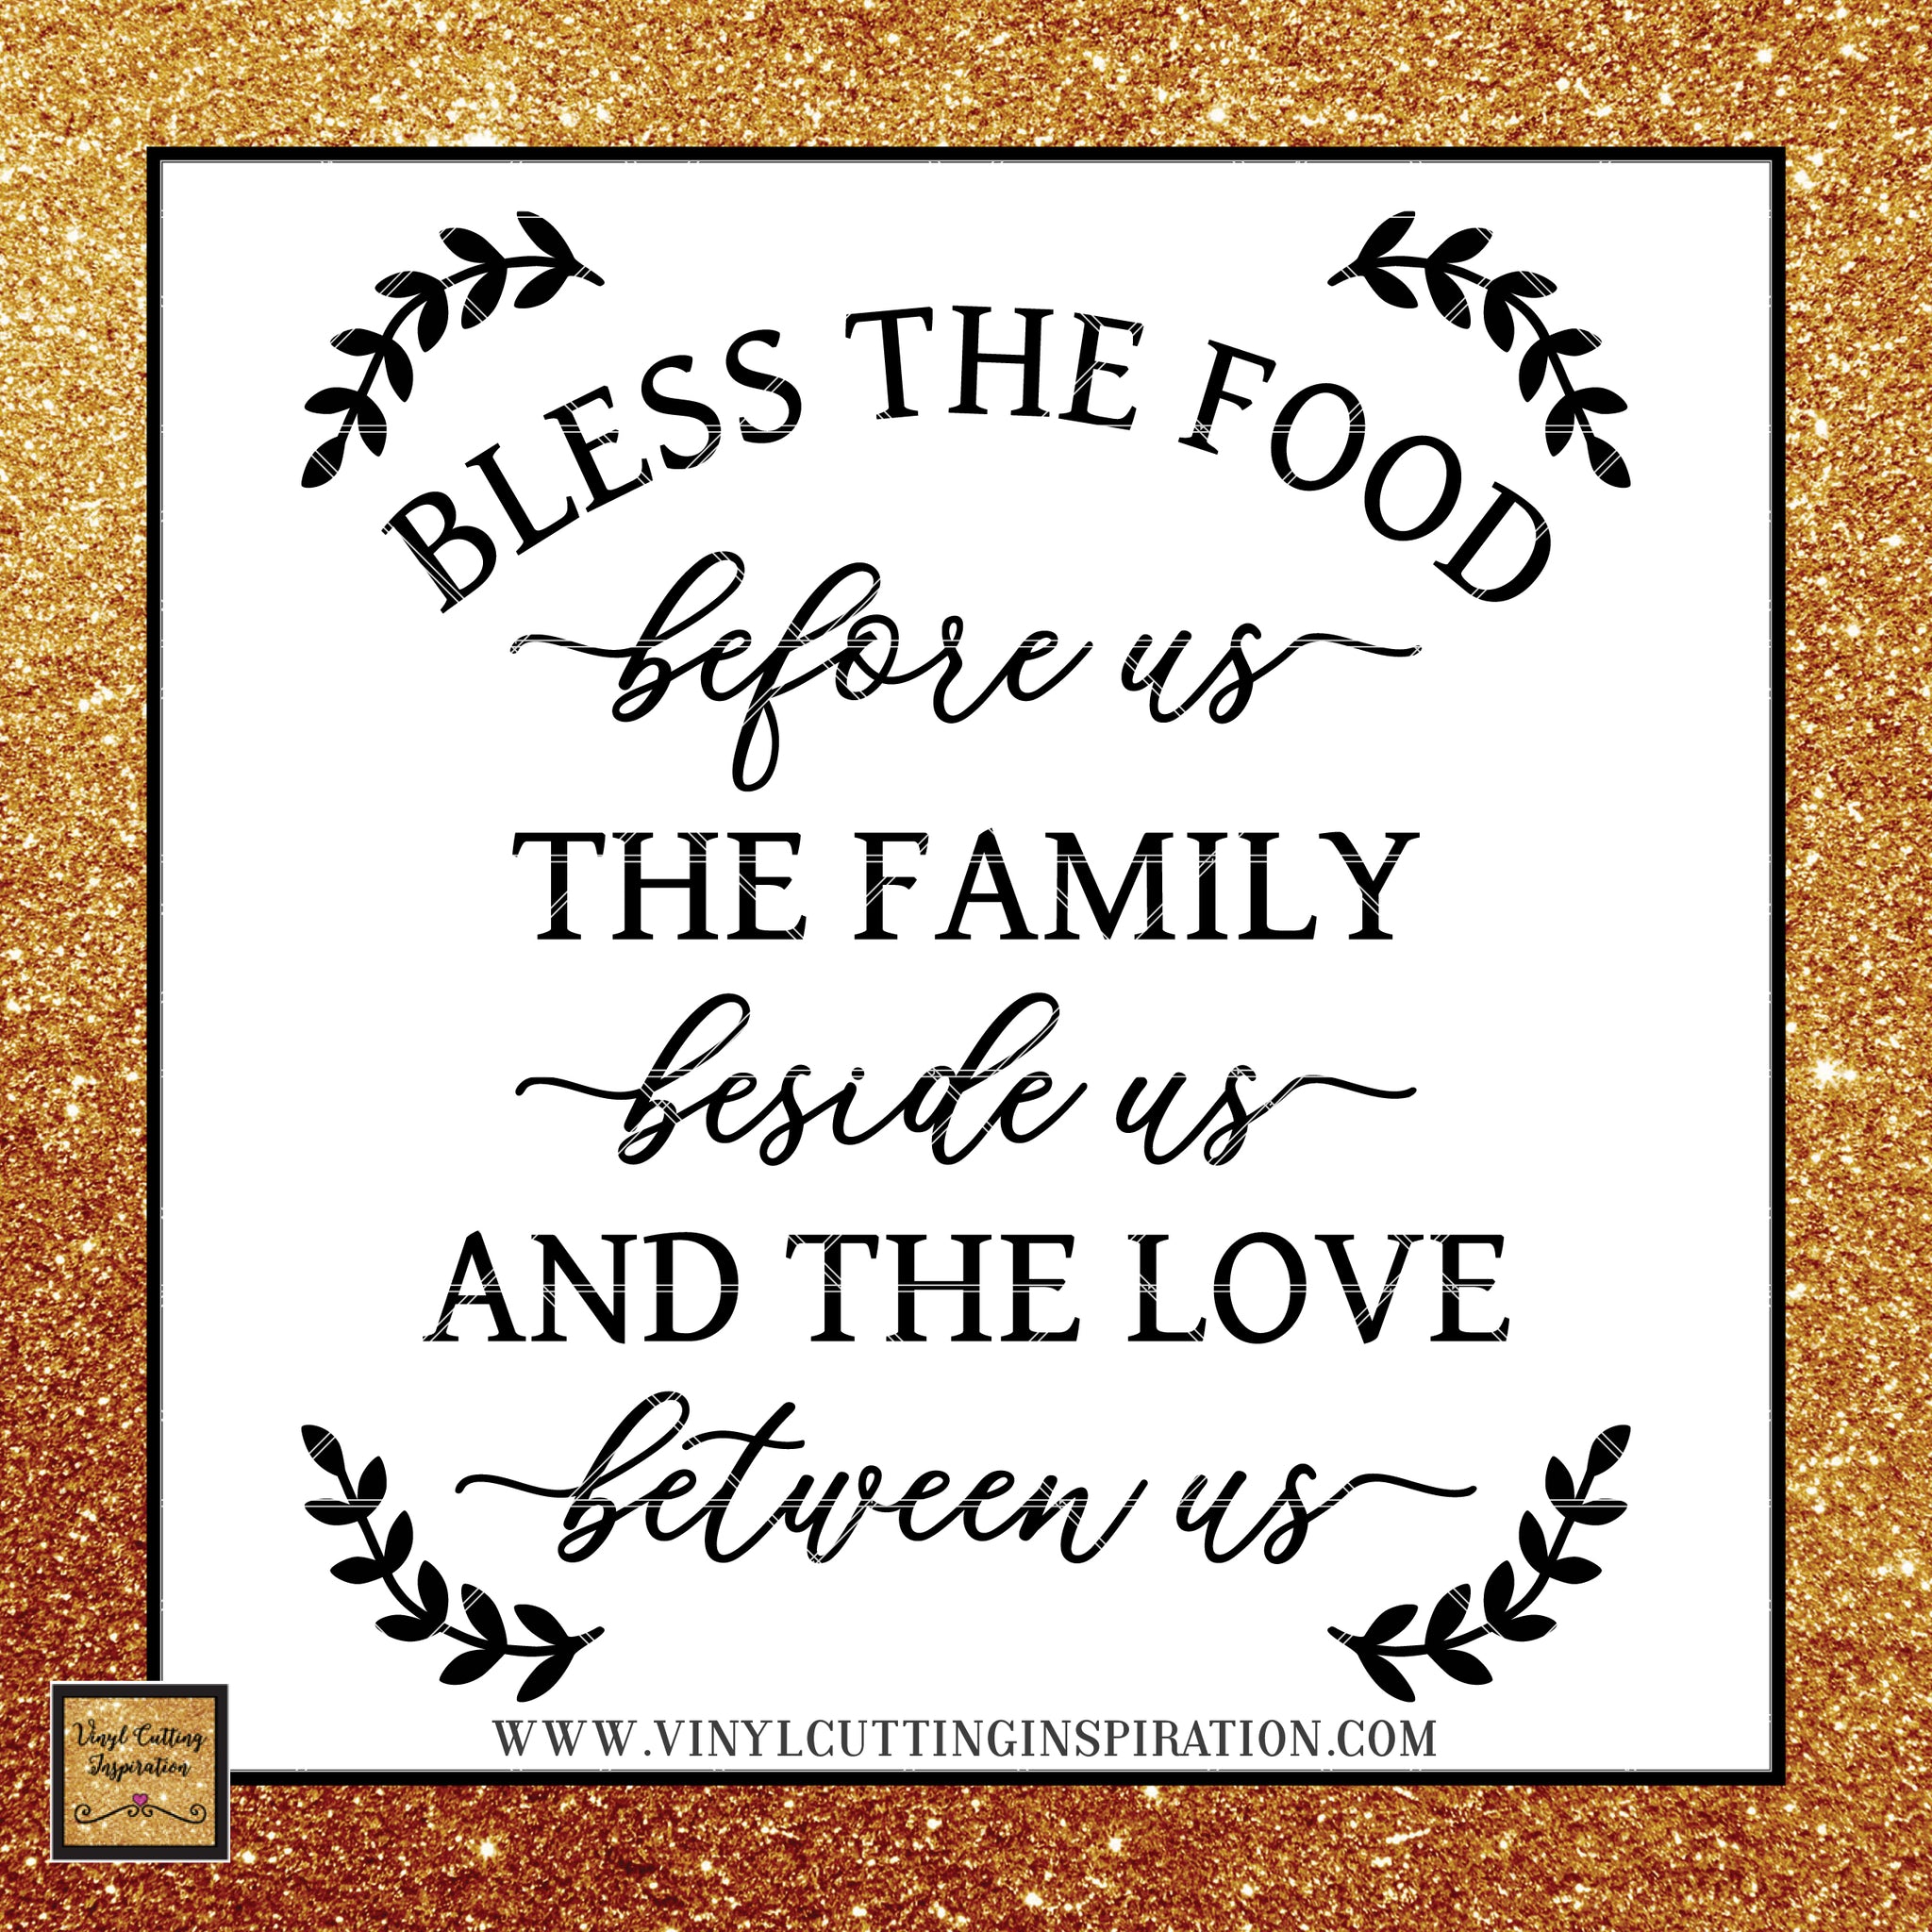 Albums 98+ Images bless the food before us free printable Latest